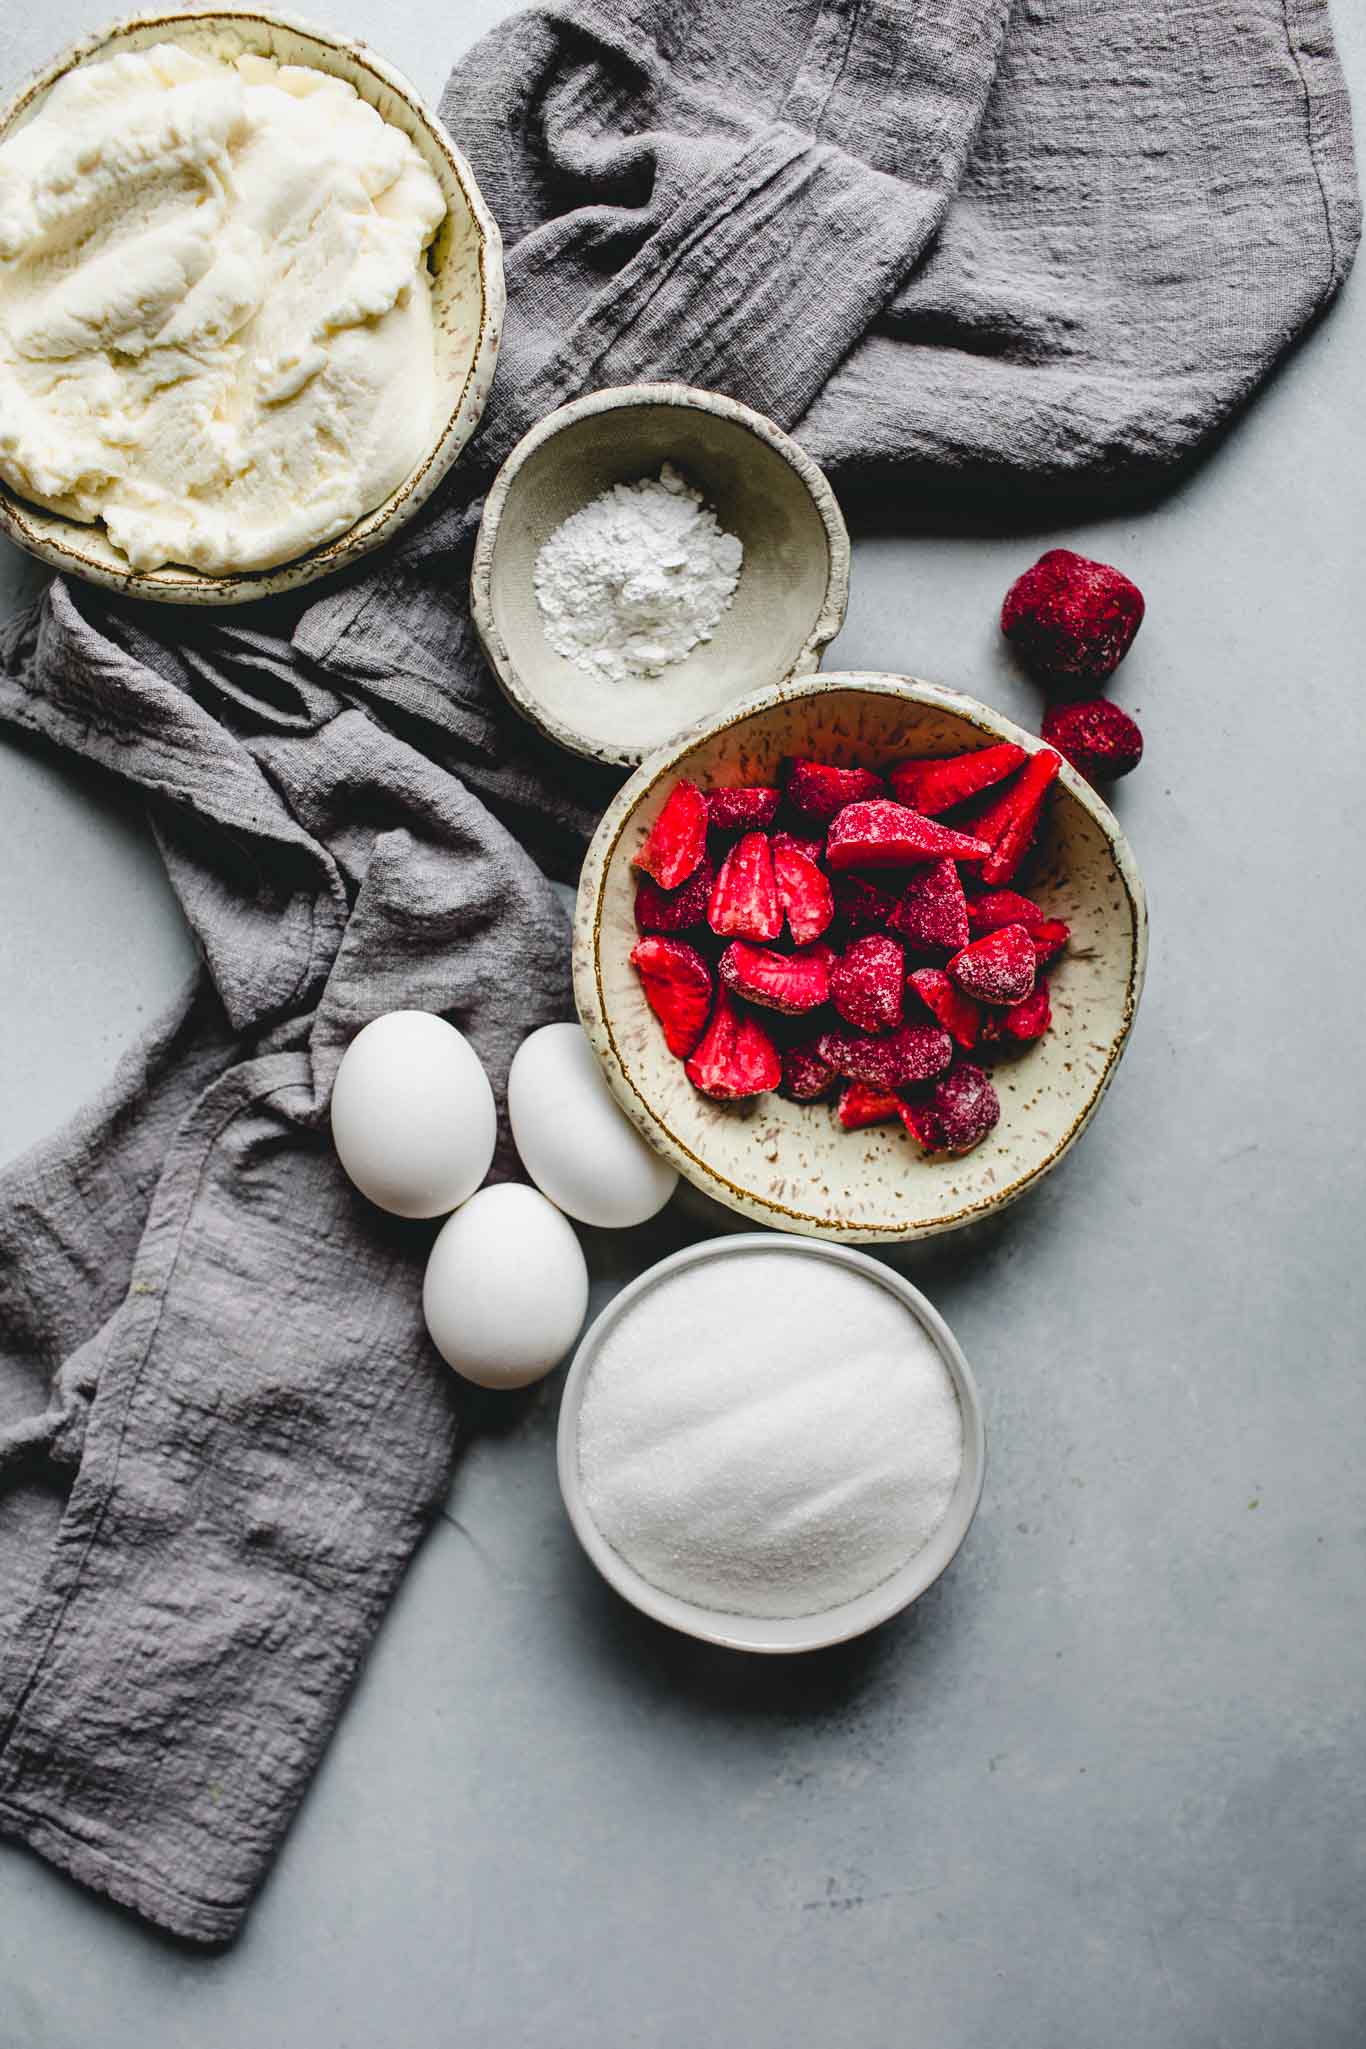 Ingredients for strawberry ricotta cake.